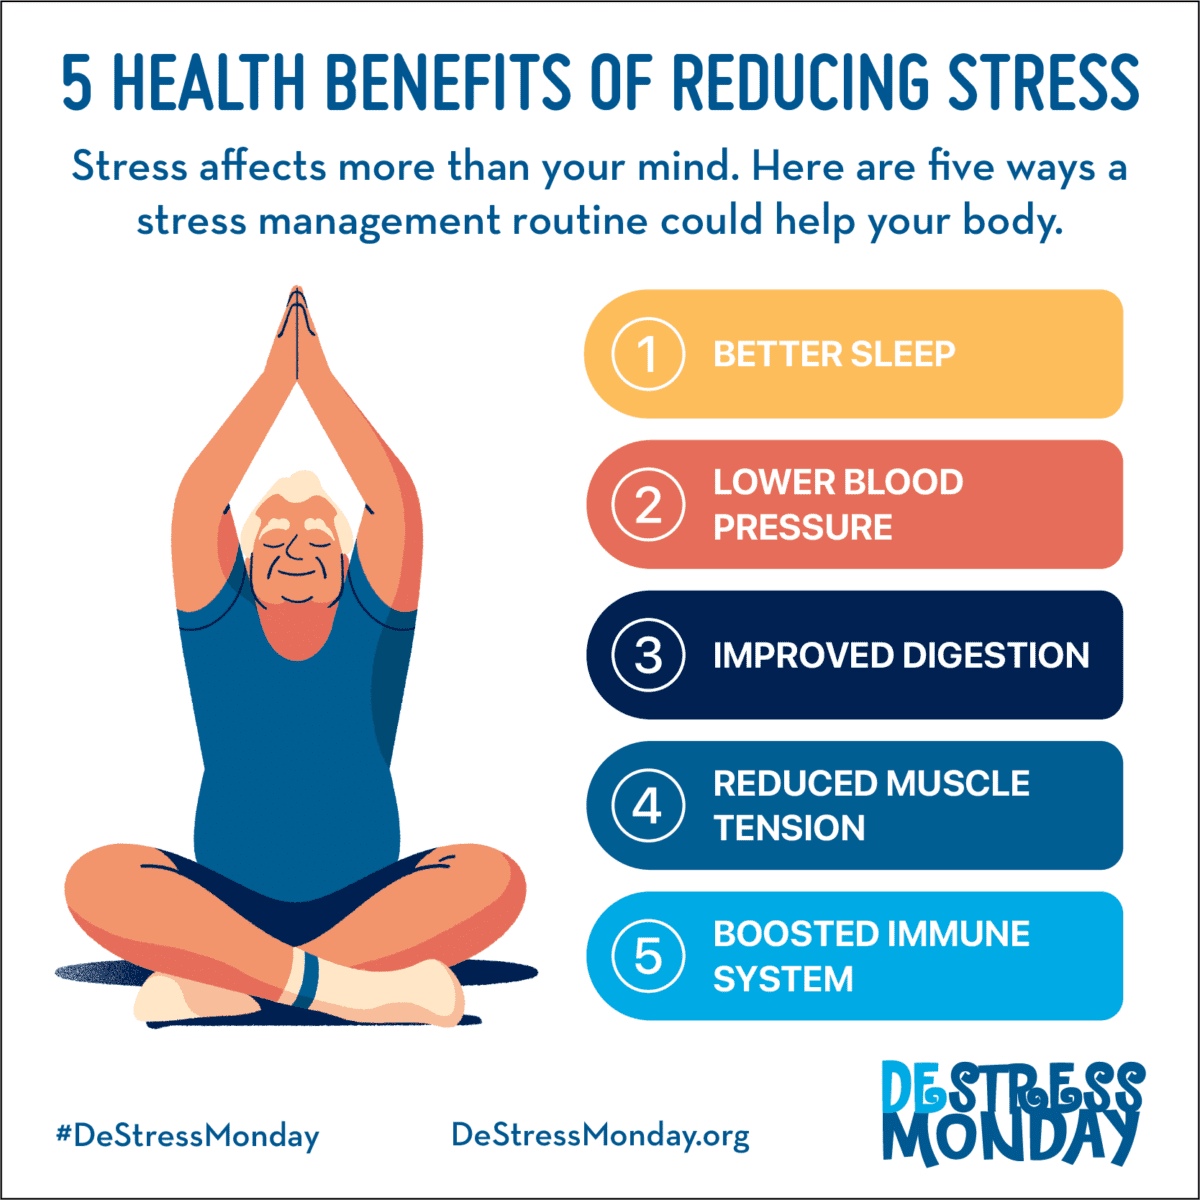 The Health Benefits Of Reducing Stress The Monday Campaigns